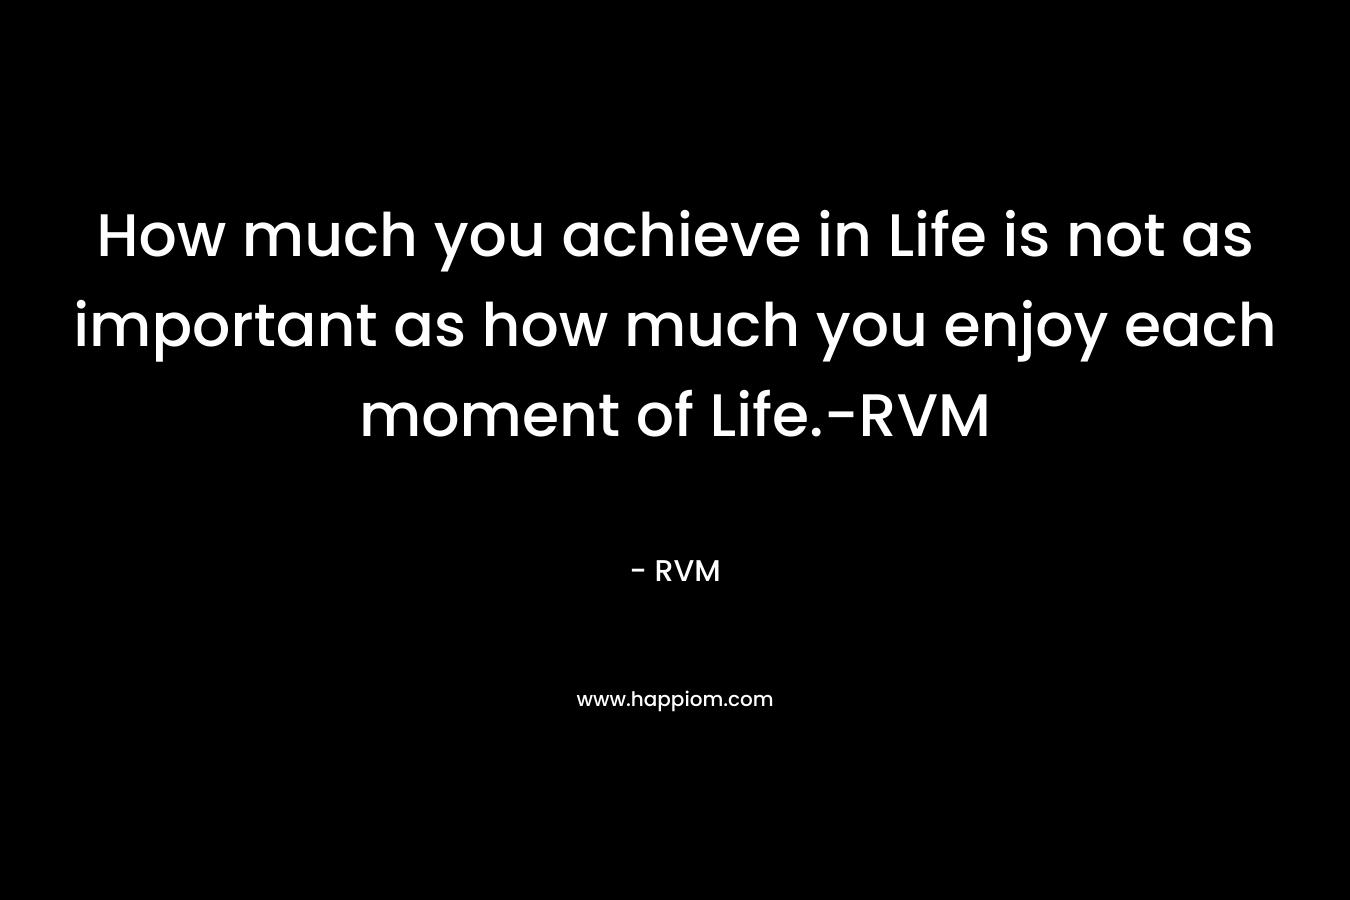 How much you achieve in Life is not as important as how much you enjoy each moment of Life.-RVM